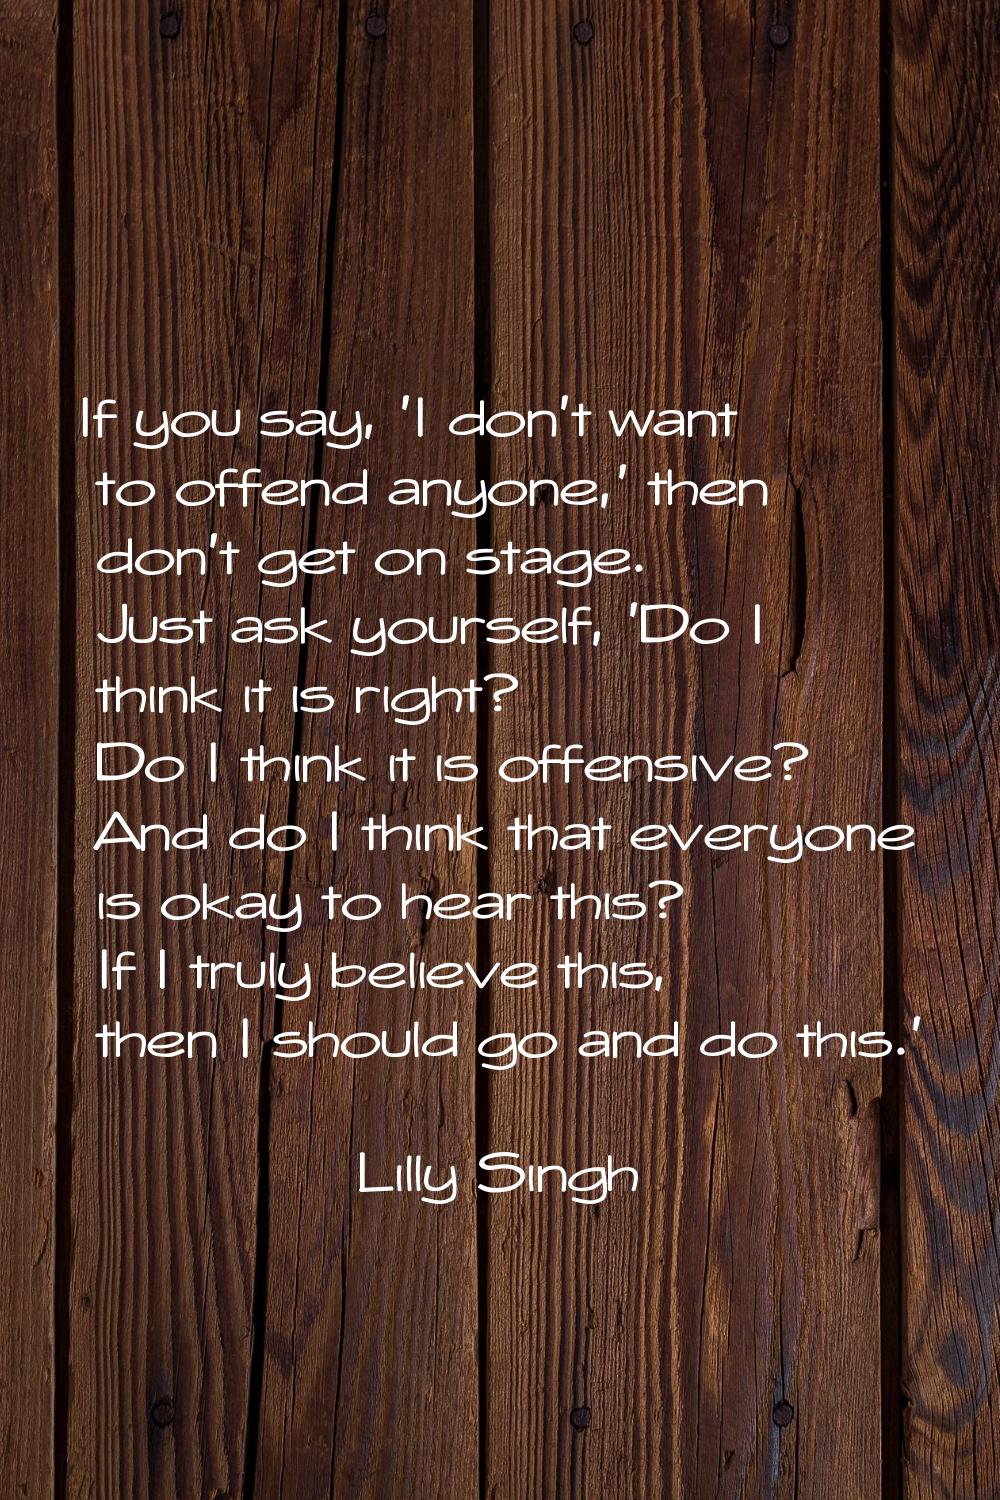 If you say, 'I don't want to offend anyone,' then don't get on stage. Just ask yourself, 'Do I thin